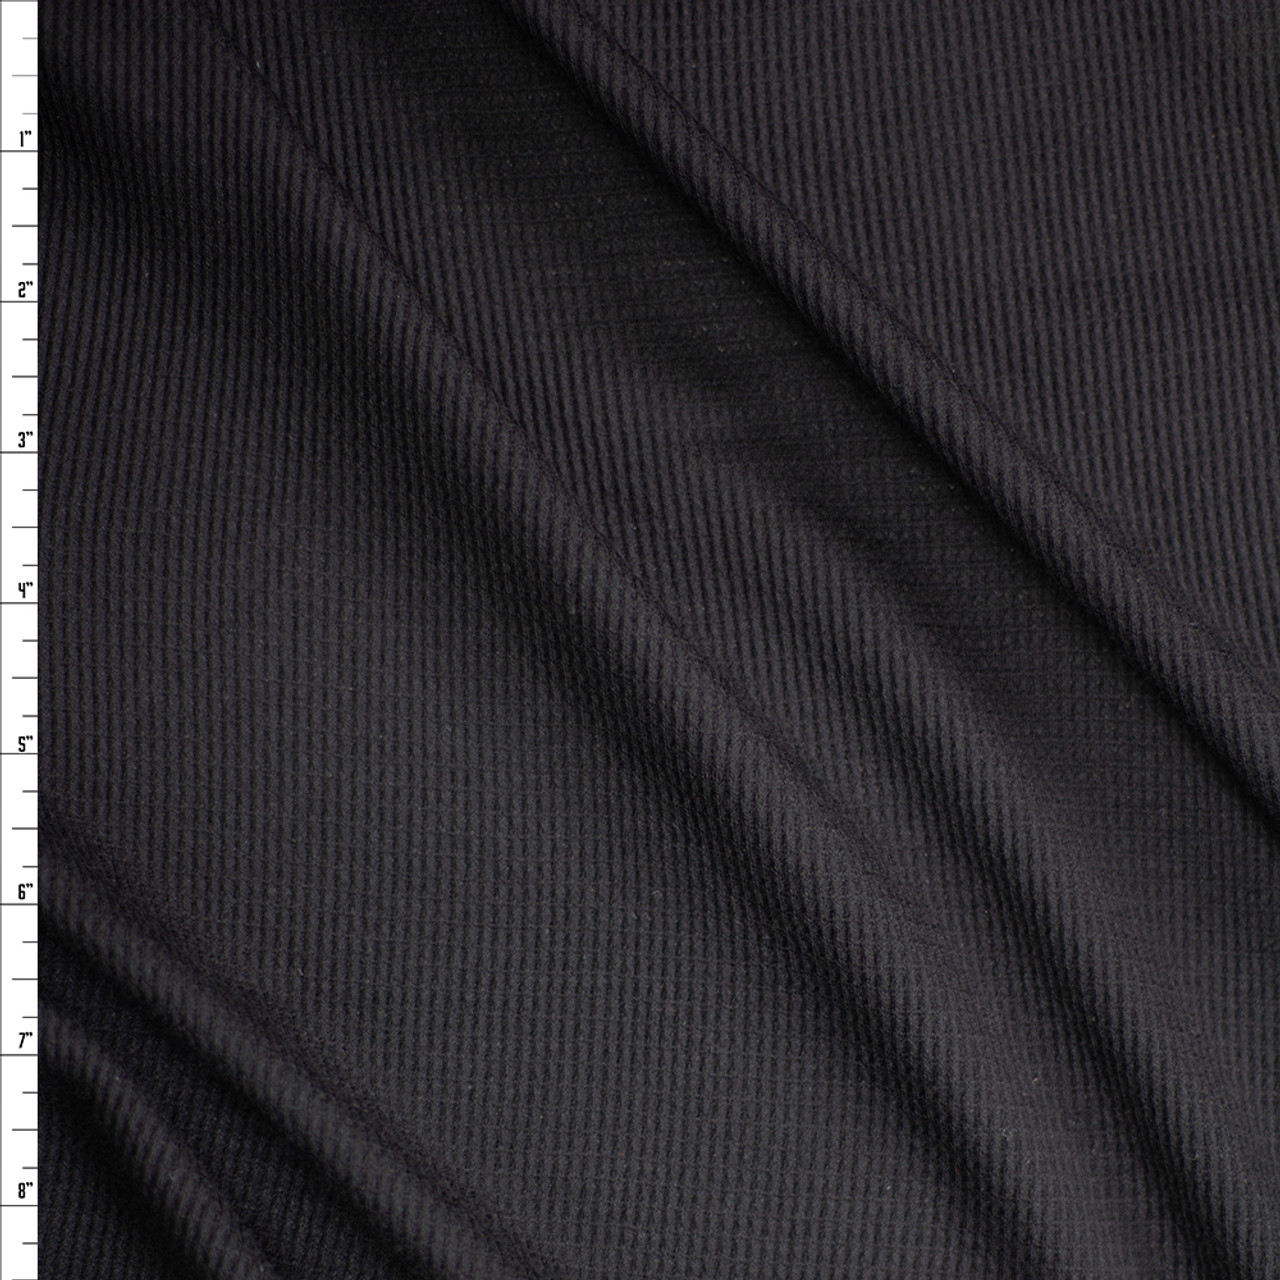 Cali Fabrics Black Crisp Midweight Poly/Wool Suiting Fabric by the Yard